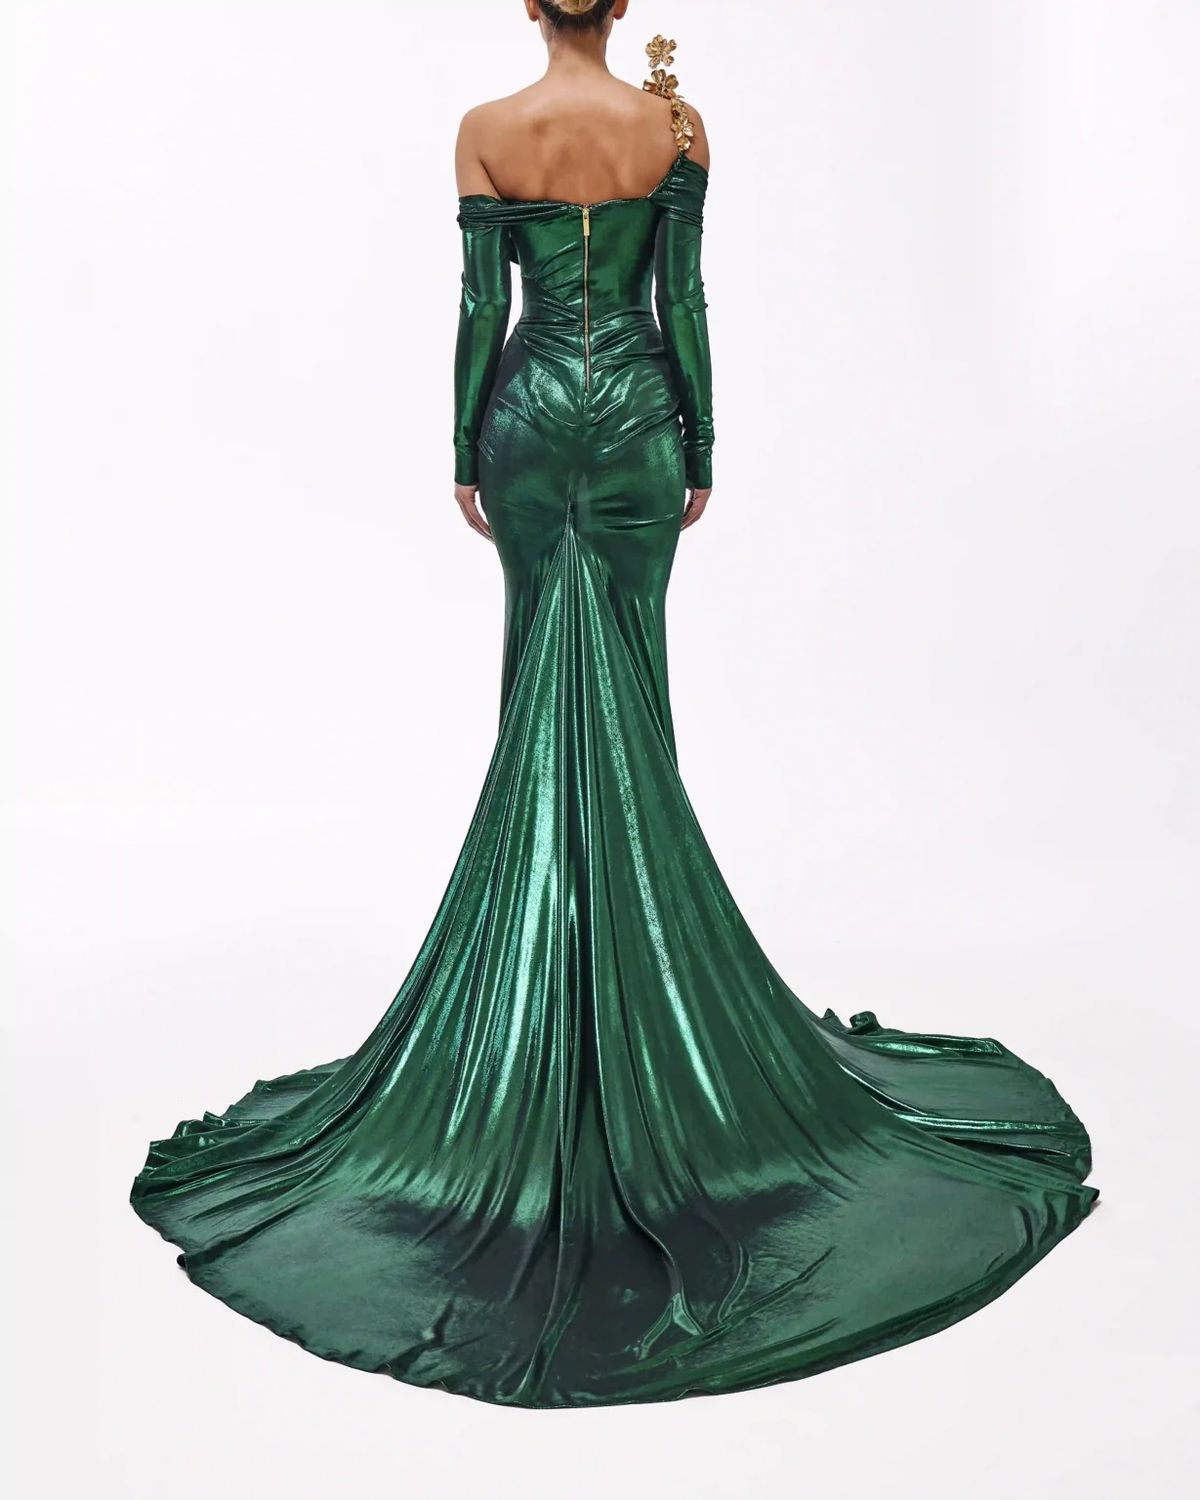 Style metallic-majesty-24-25 Valdrin Sahiti Size L Pageant Green Mermaid Dress on Queenly